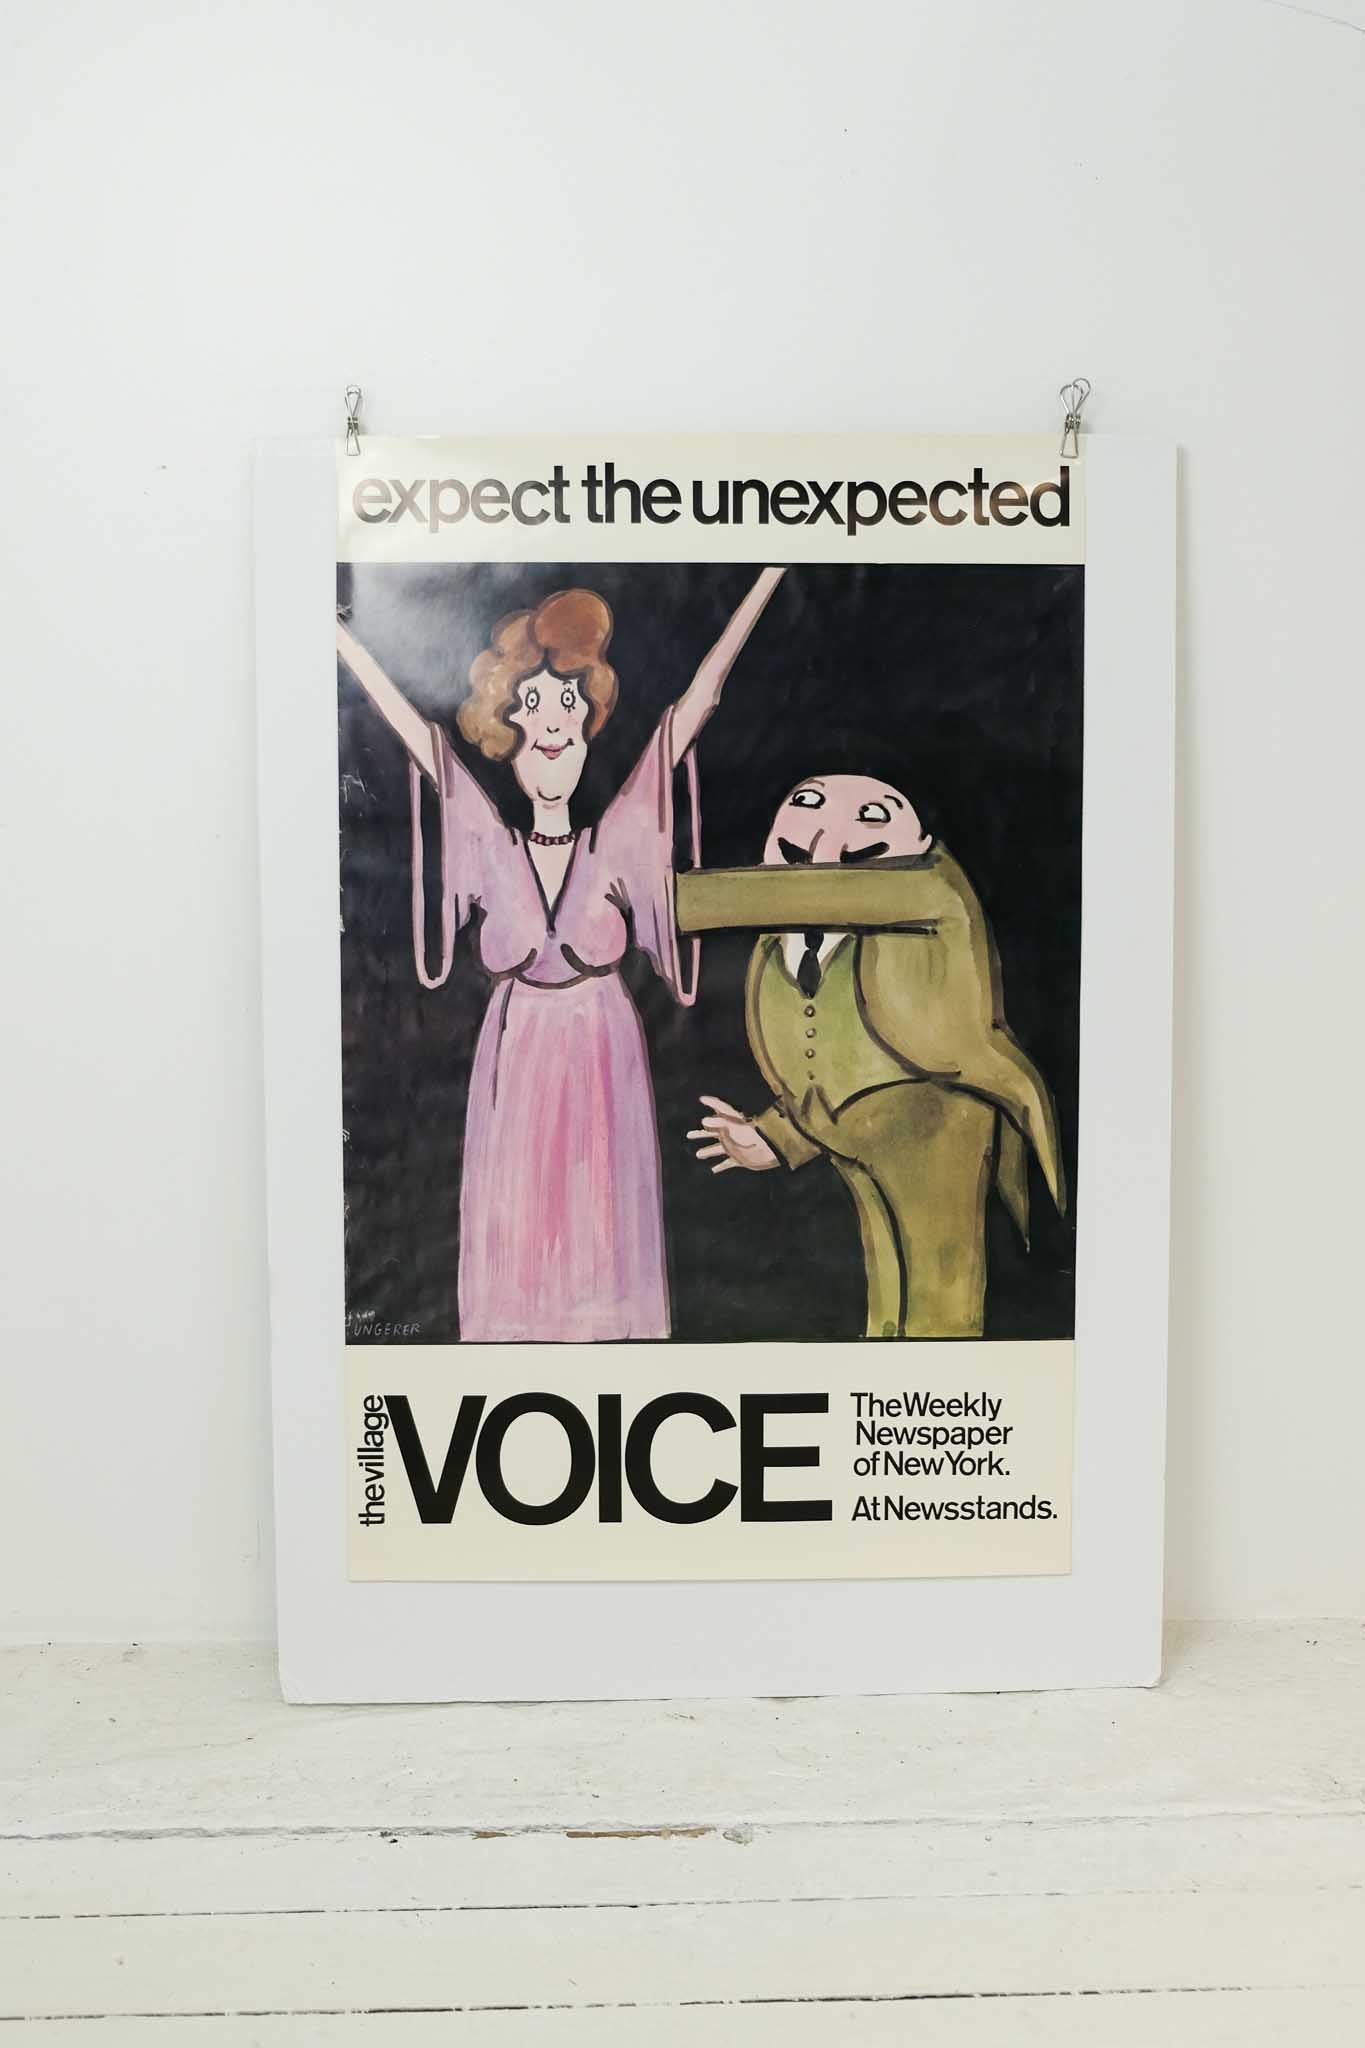 Tom Ungerer "Expect the Unexpected" Village Voice Print